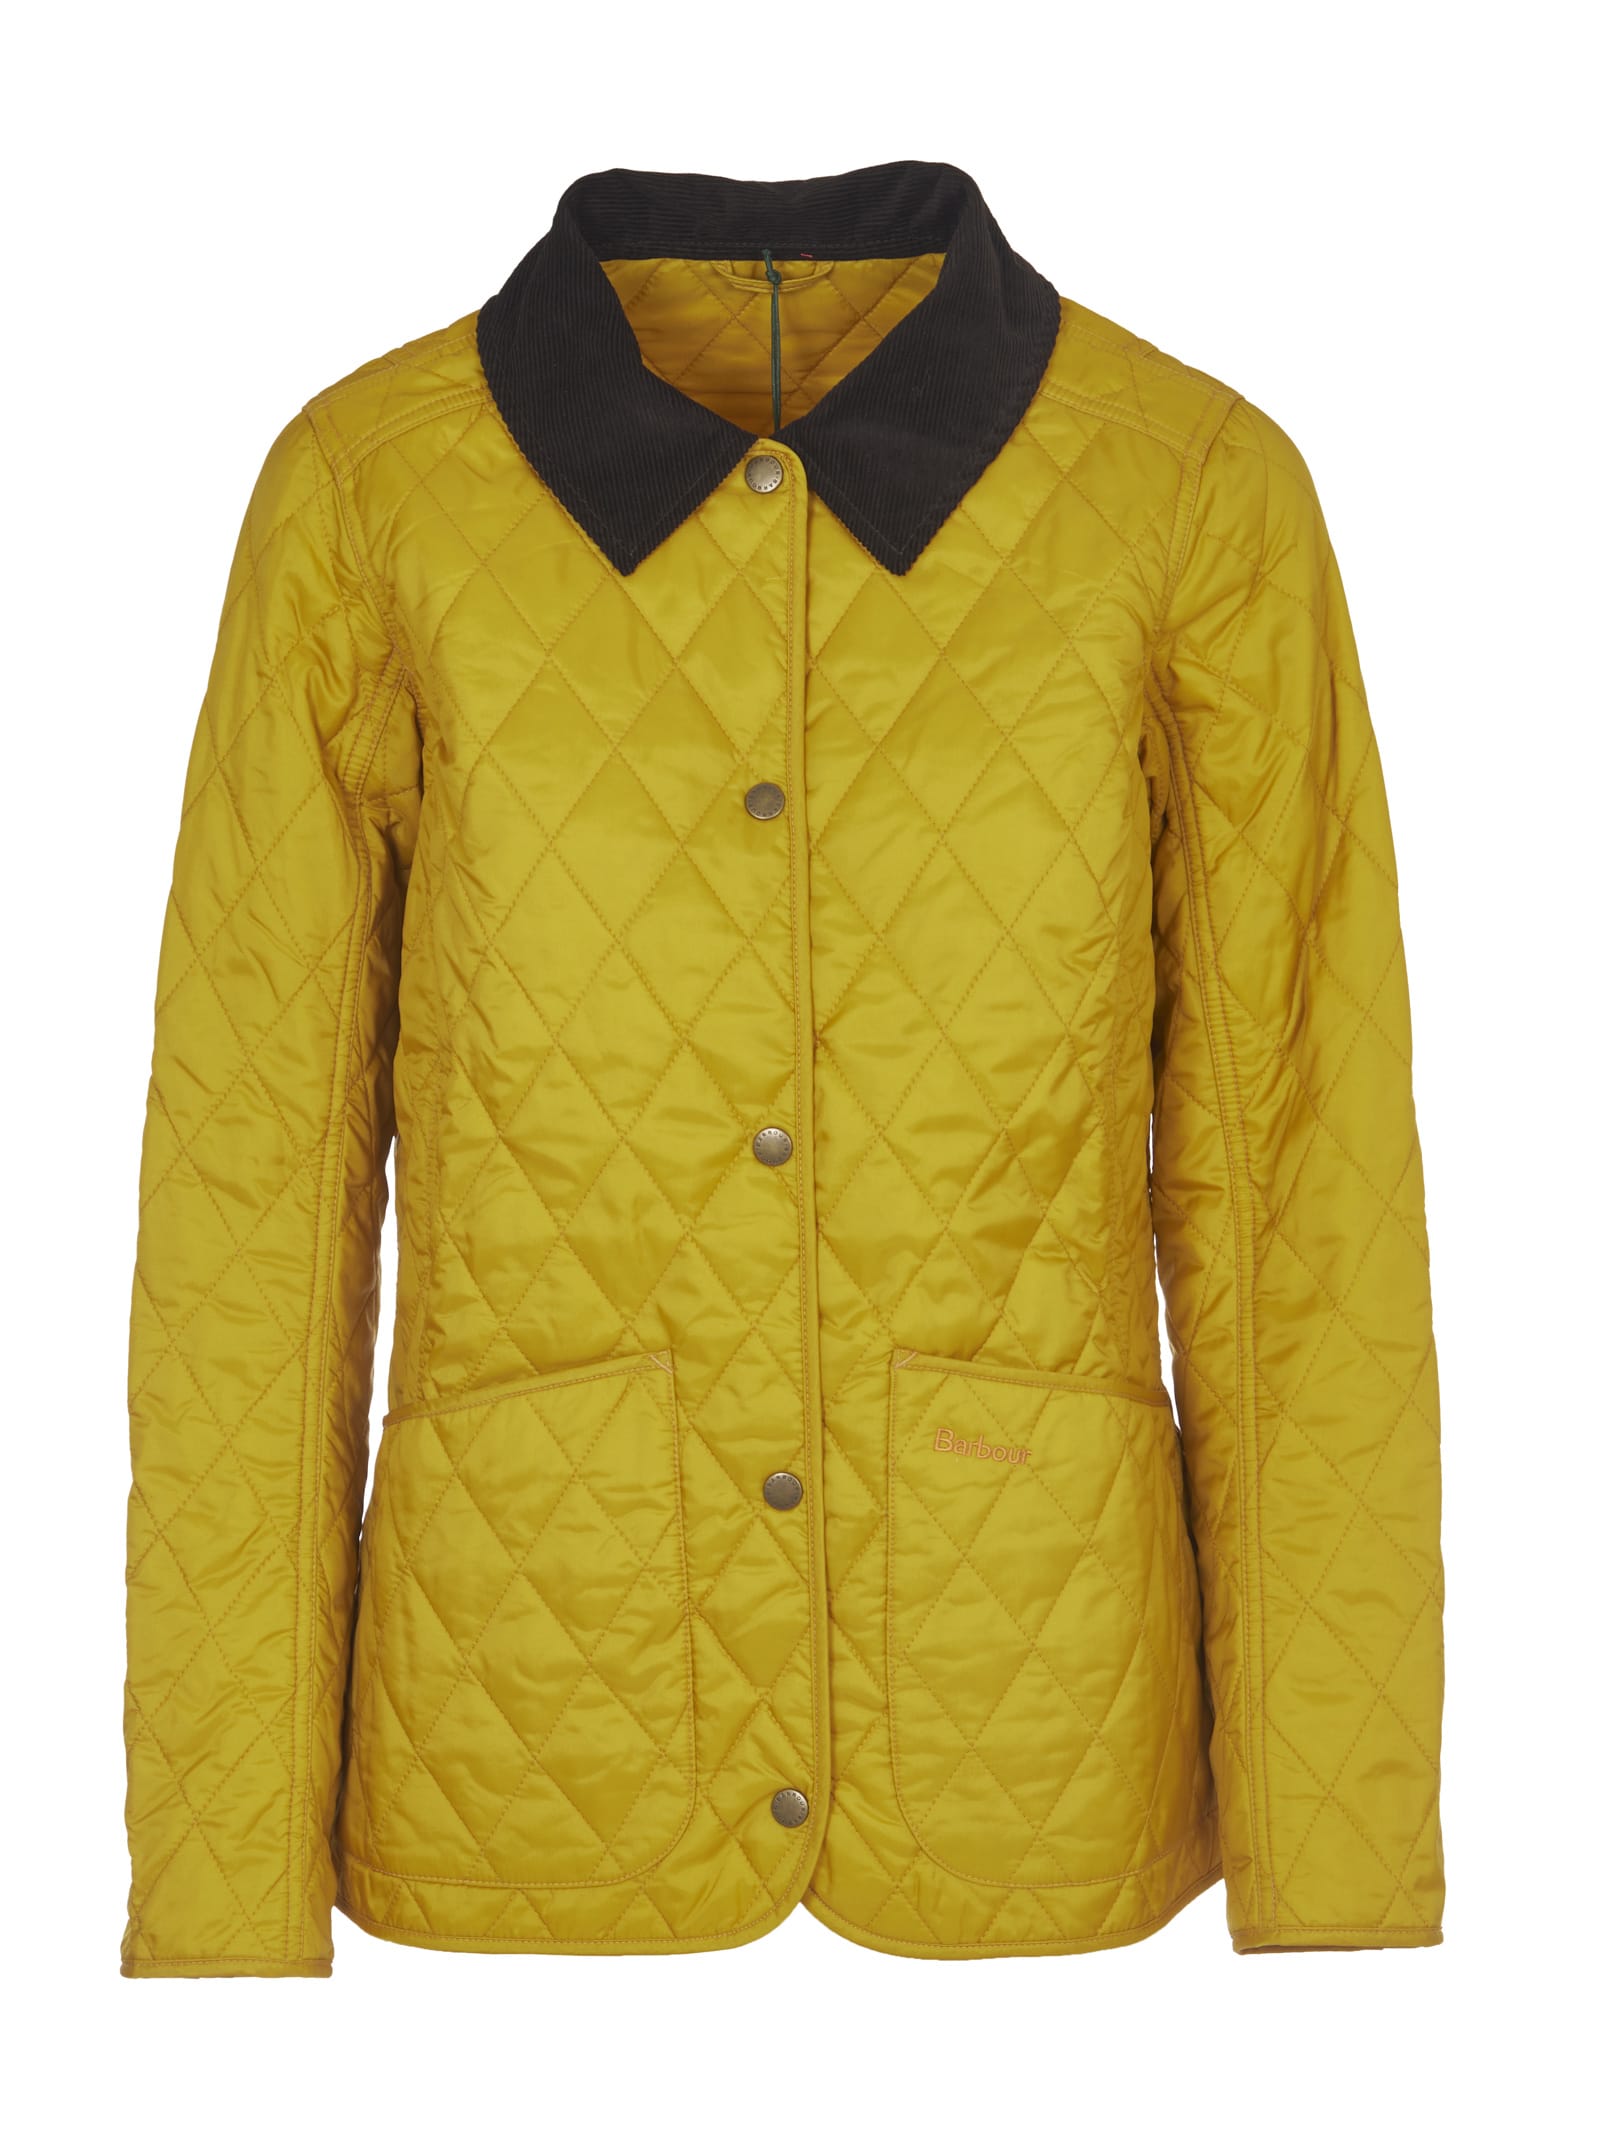 Barbour Yellow Quilted Annadale Jacket